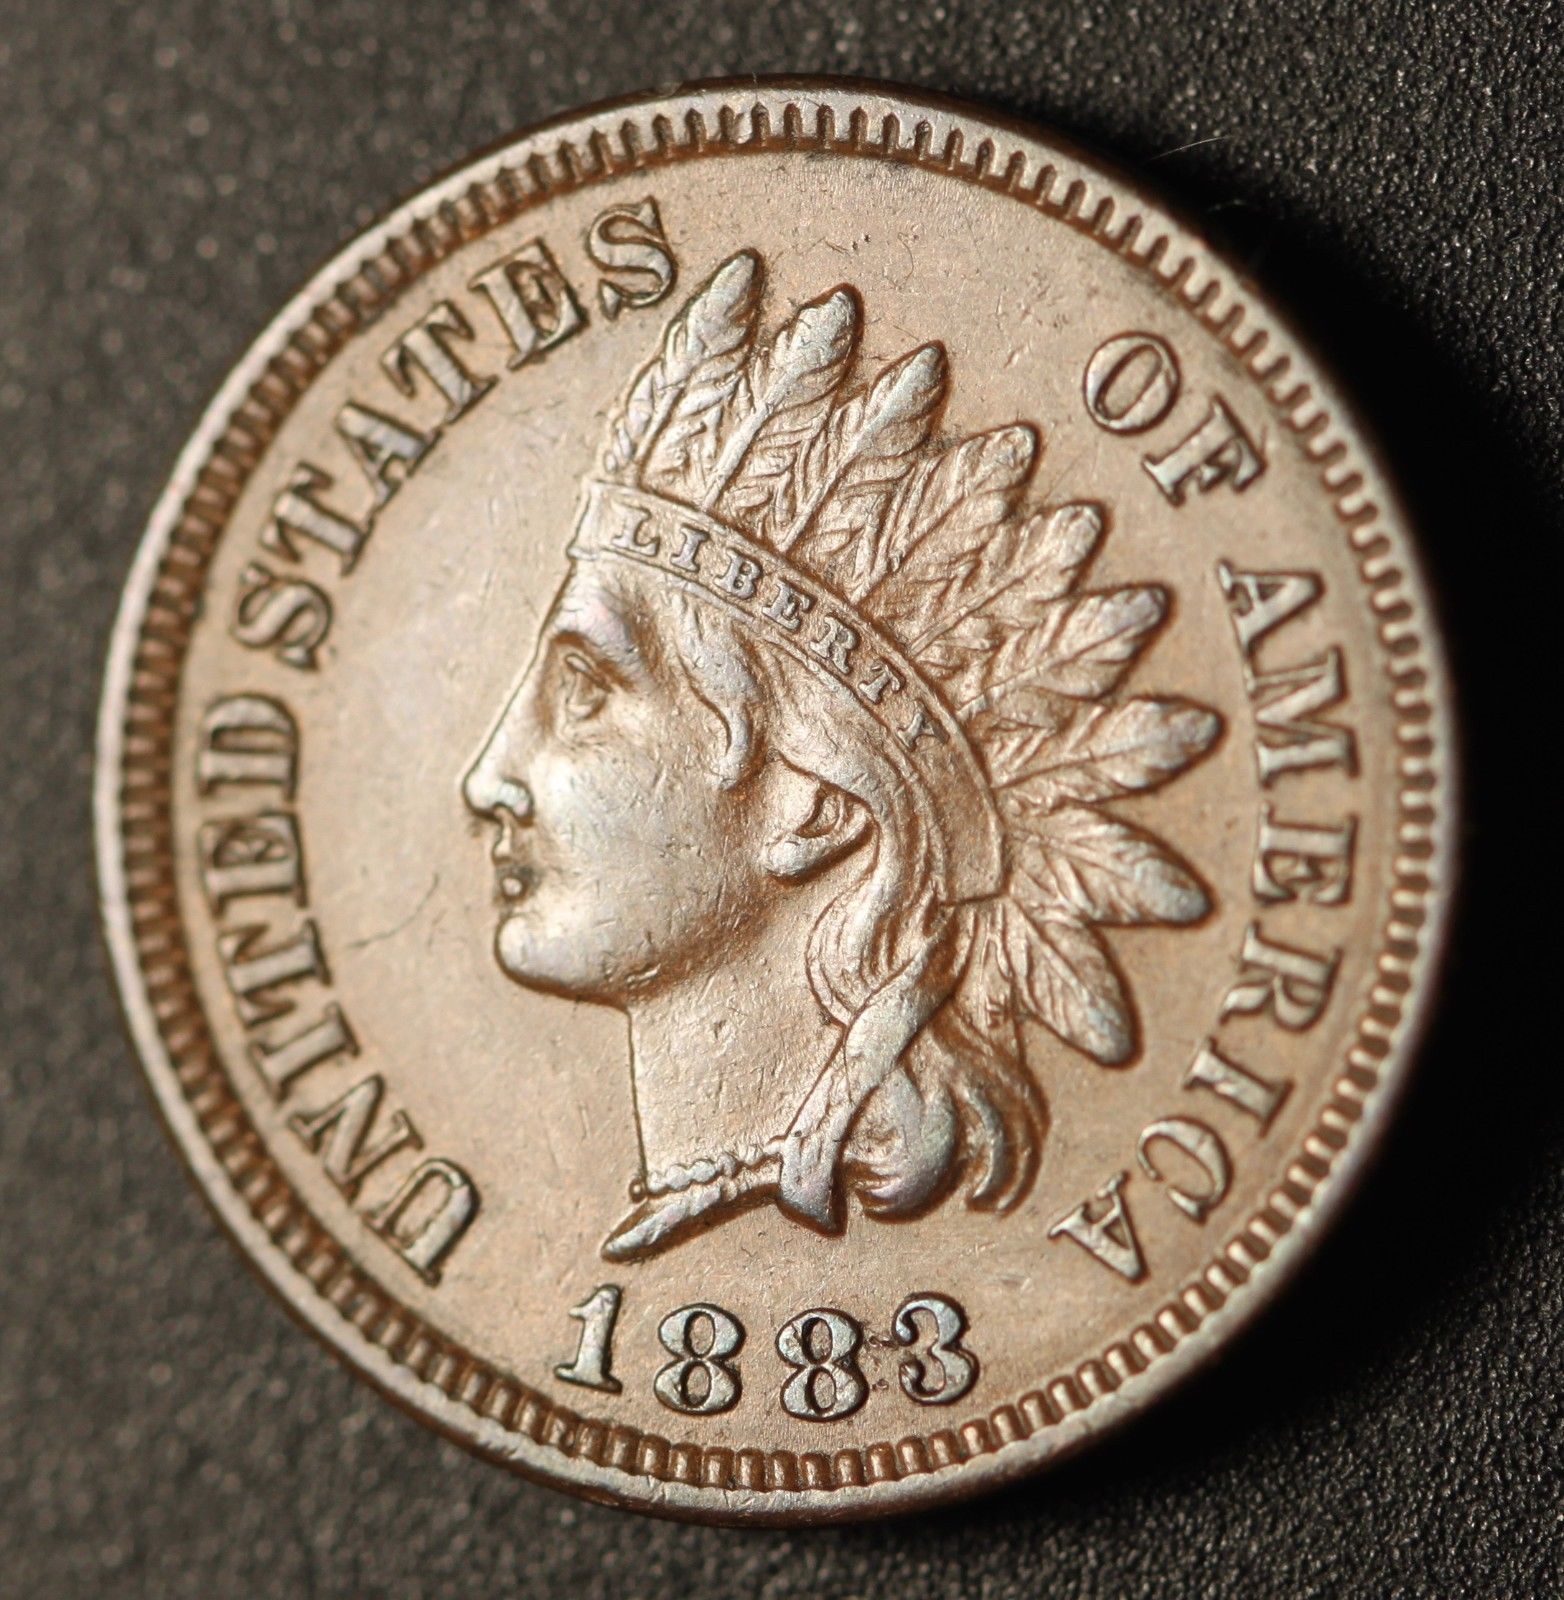 1883 RPD-003 - Indian Head Penny - Photo by Ed Nathanson